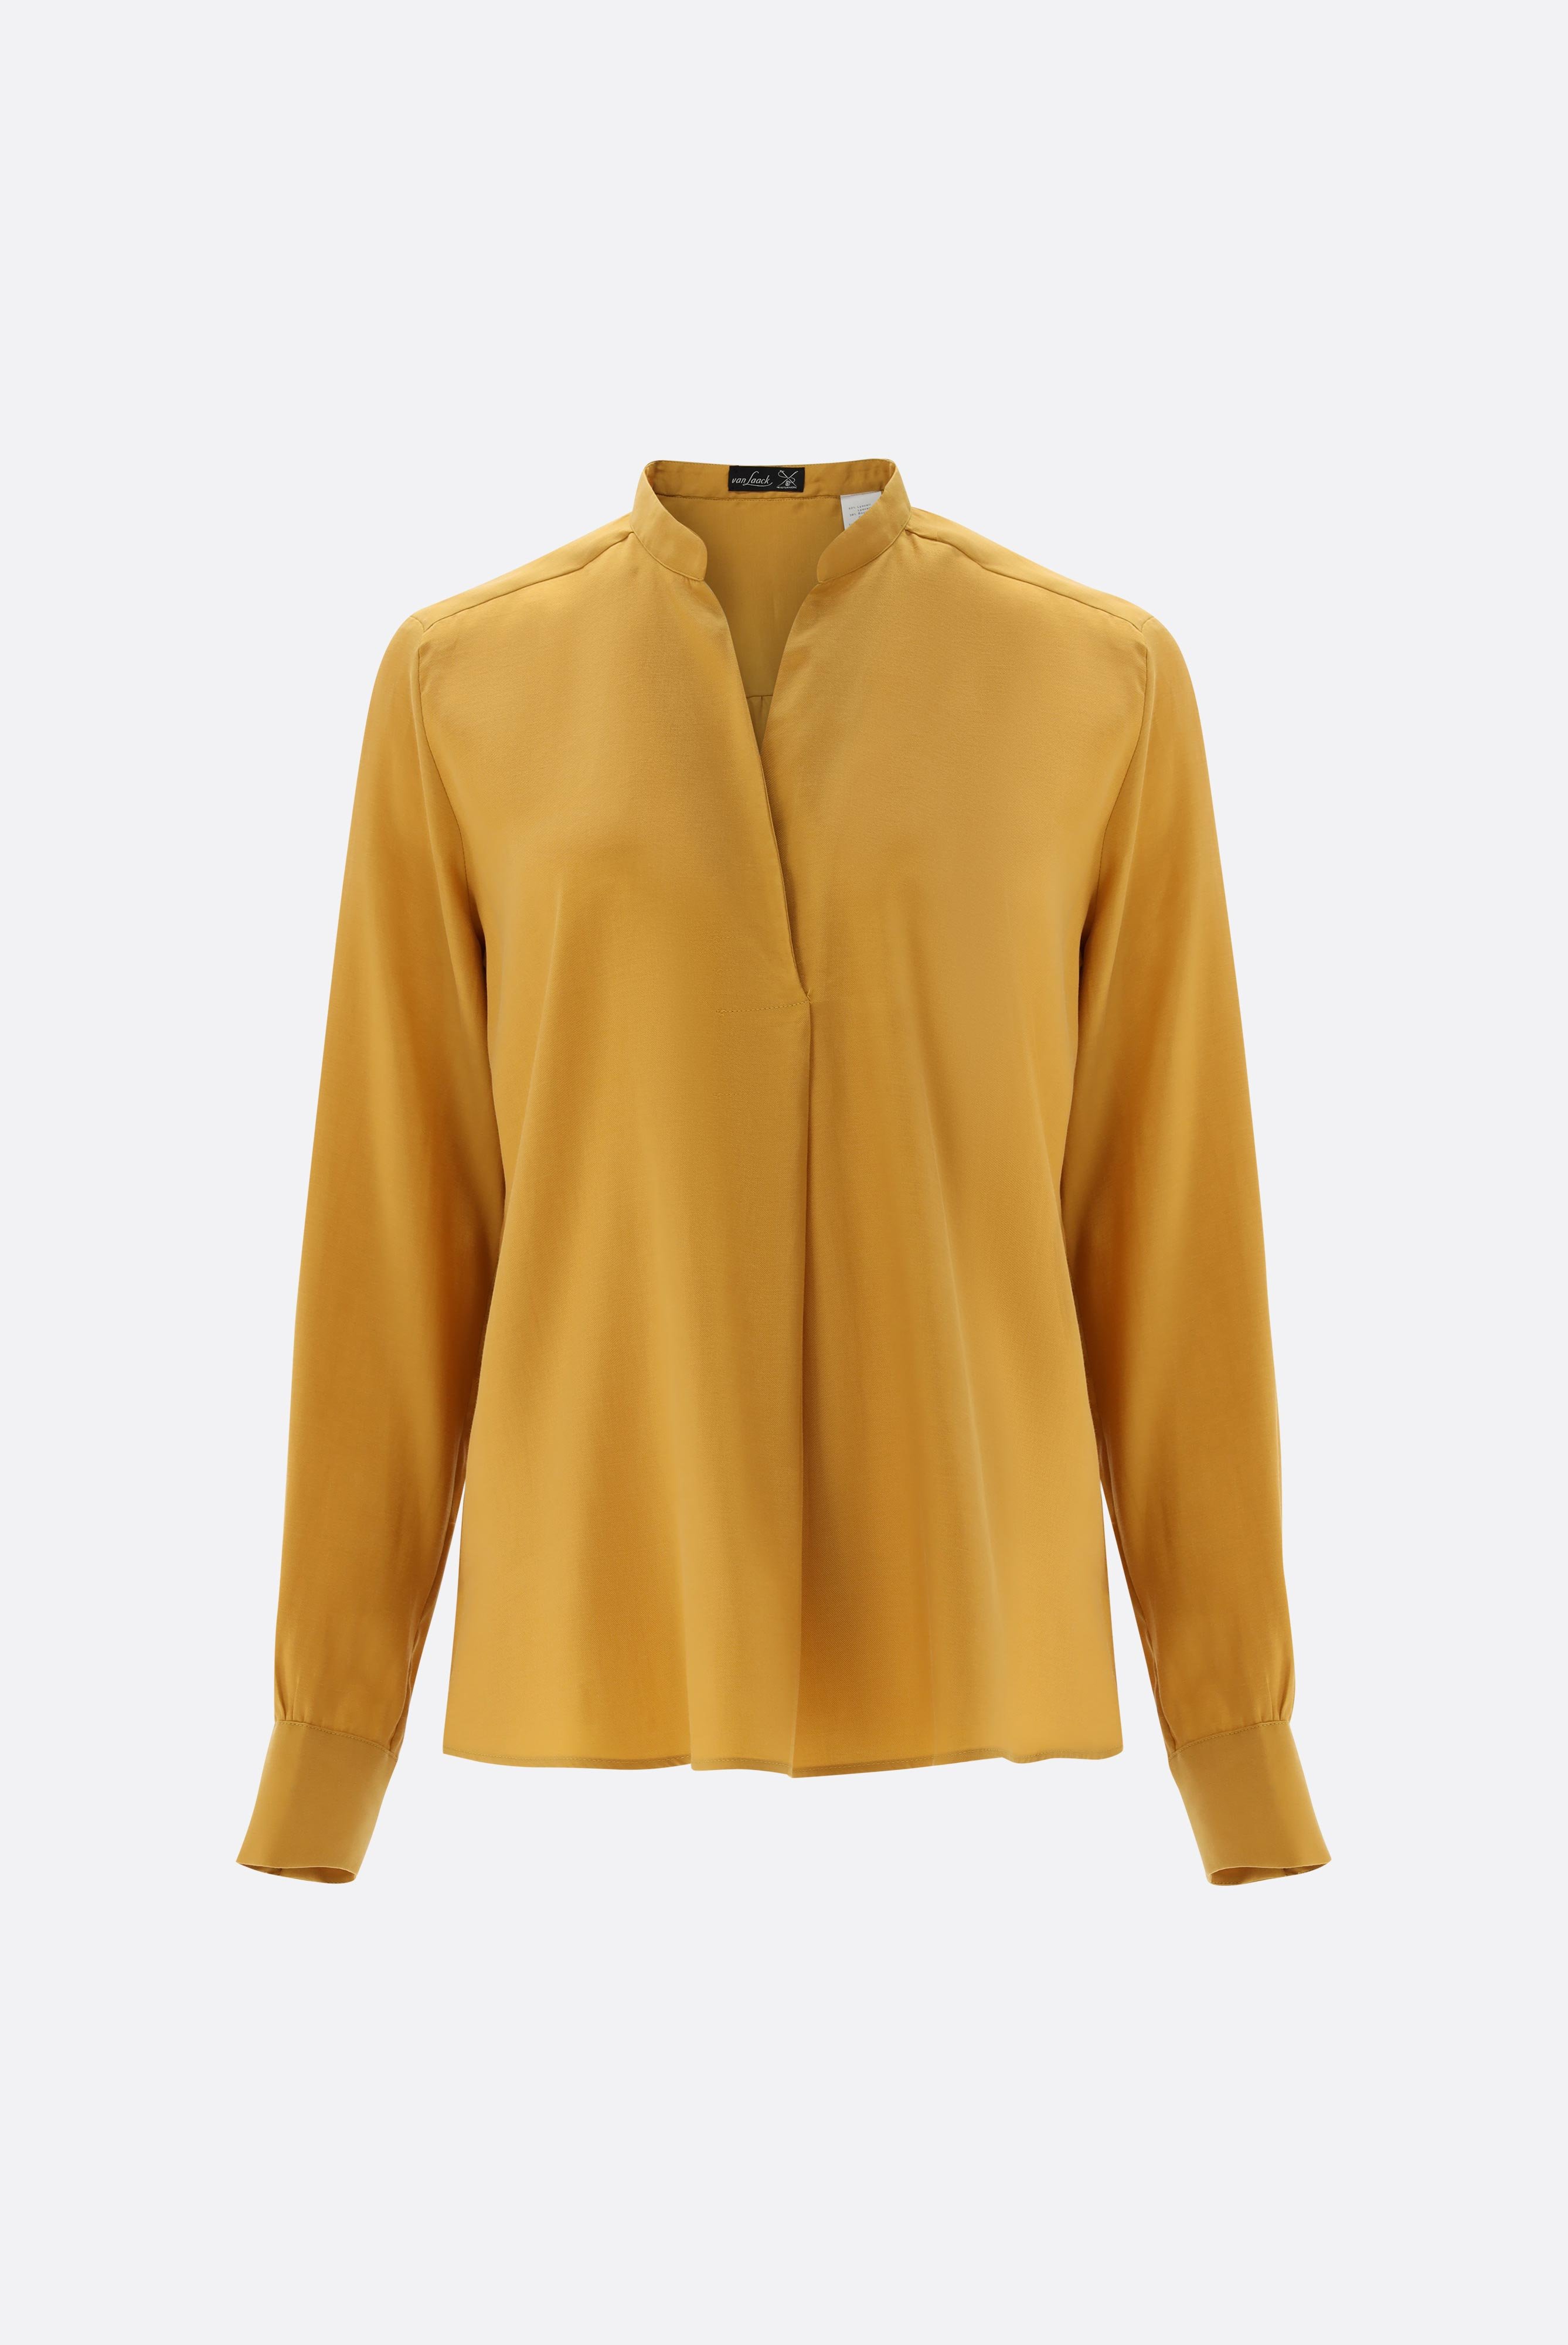 Casual Blouses+Stand-up Collar Shirt with lyocell and cotton+05.527Y.49.150258.270.38